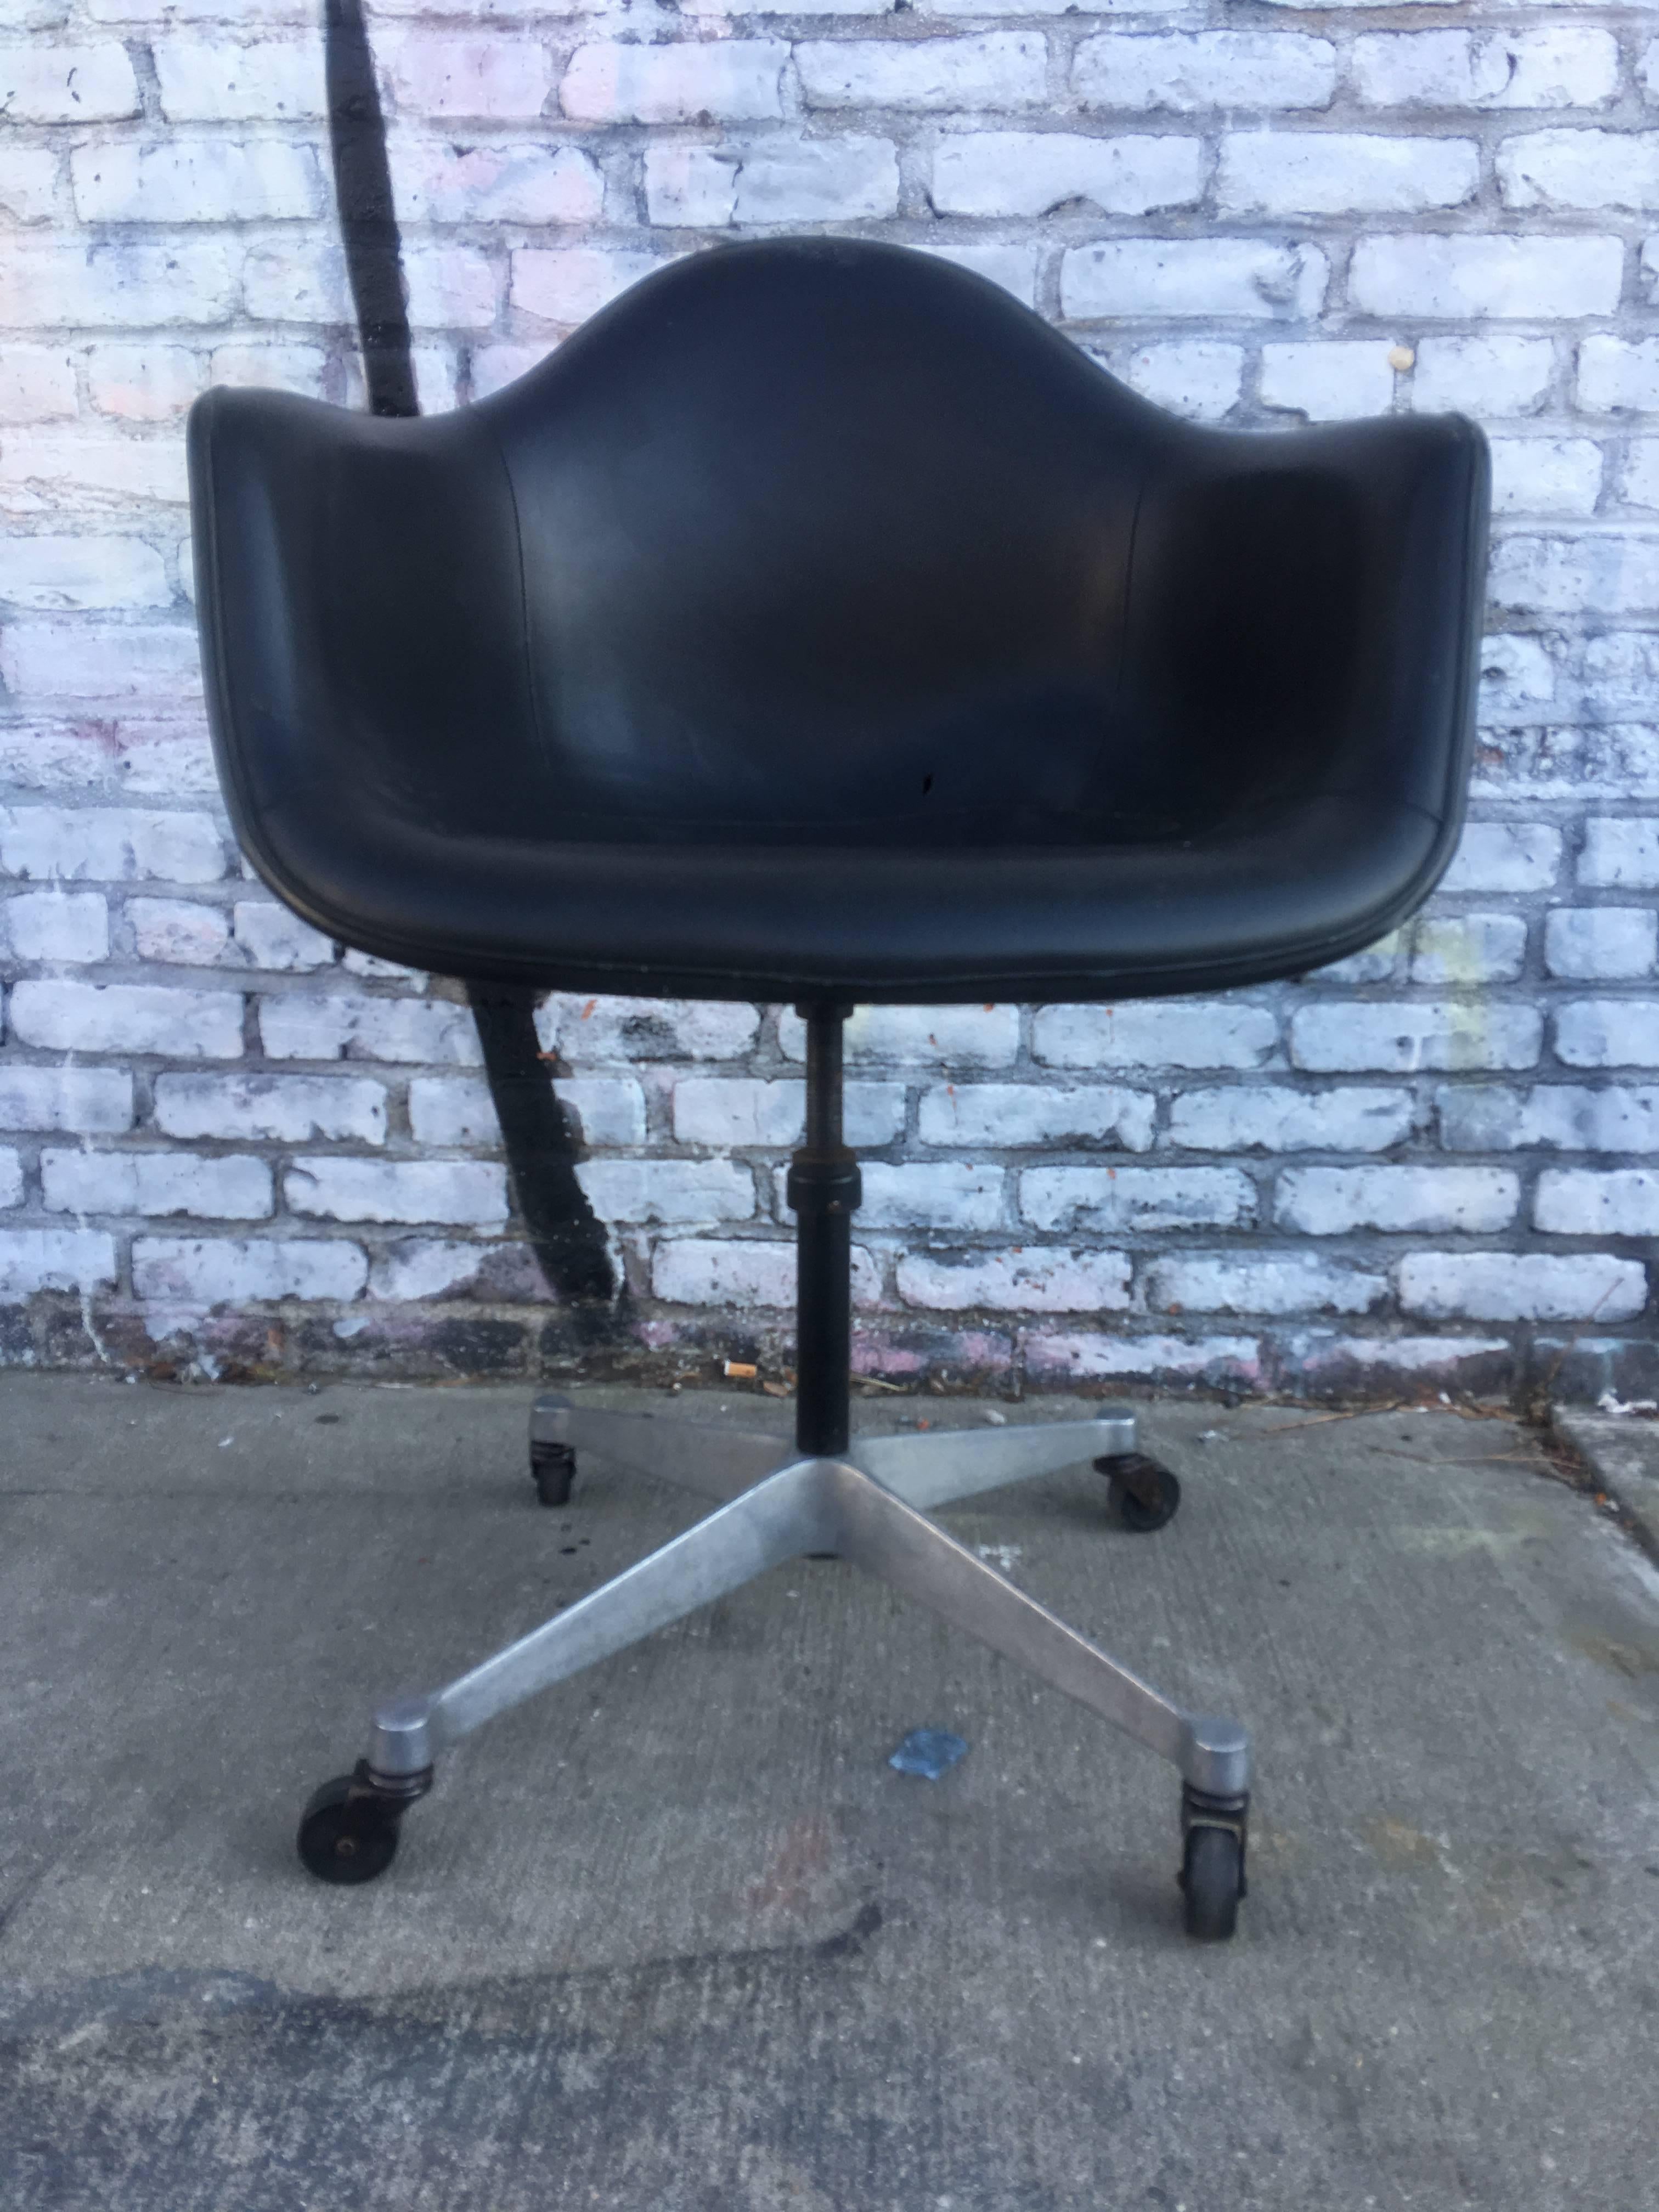 Black on black Herman Miller Eames fiberglass armchair with naugahyde upholstery. In excellent condition with one small slit in vinyl. Piping intact with no separation.